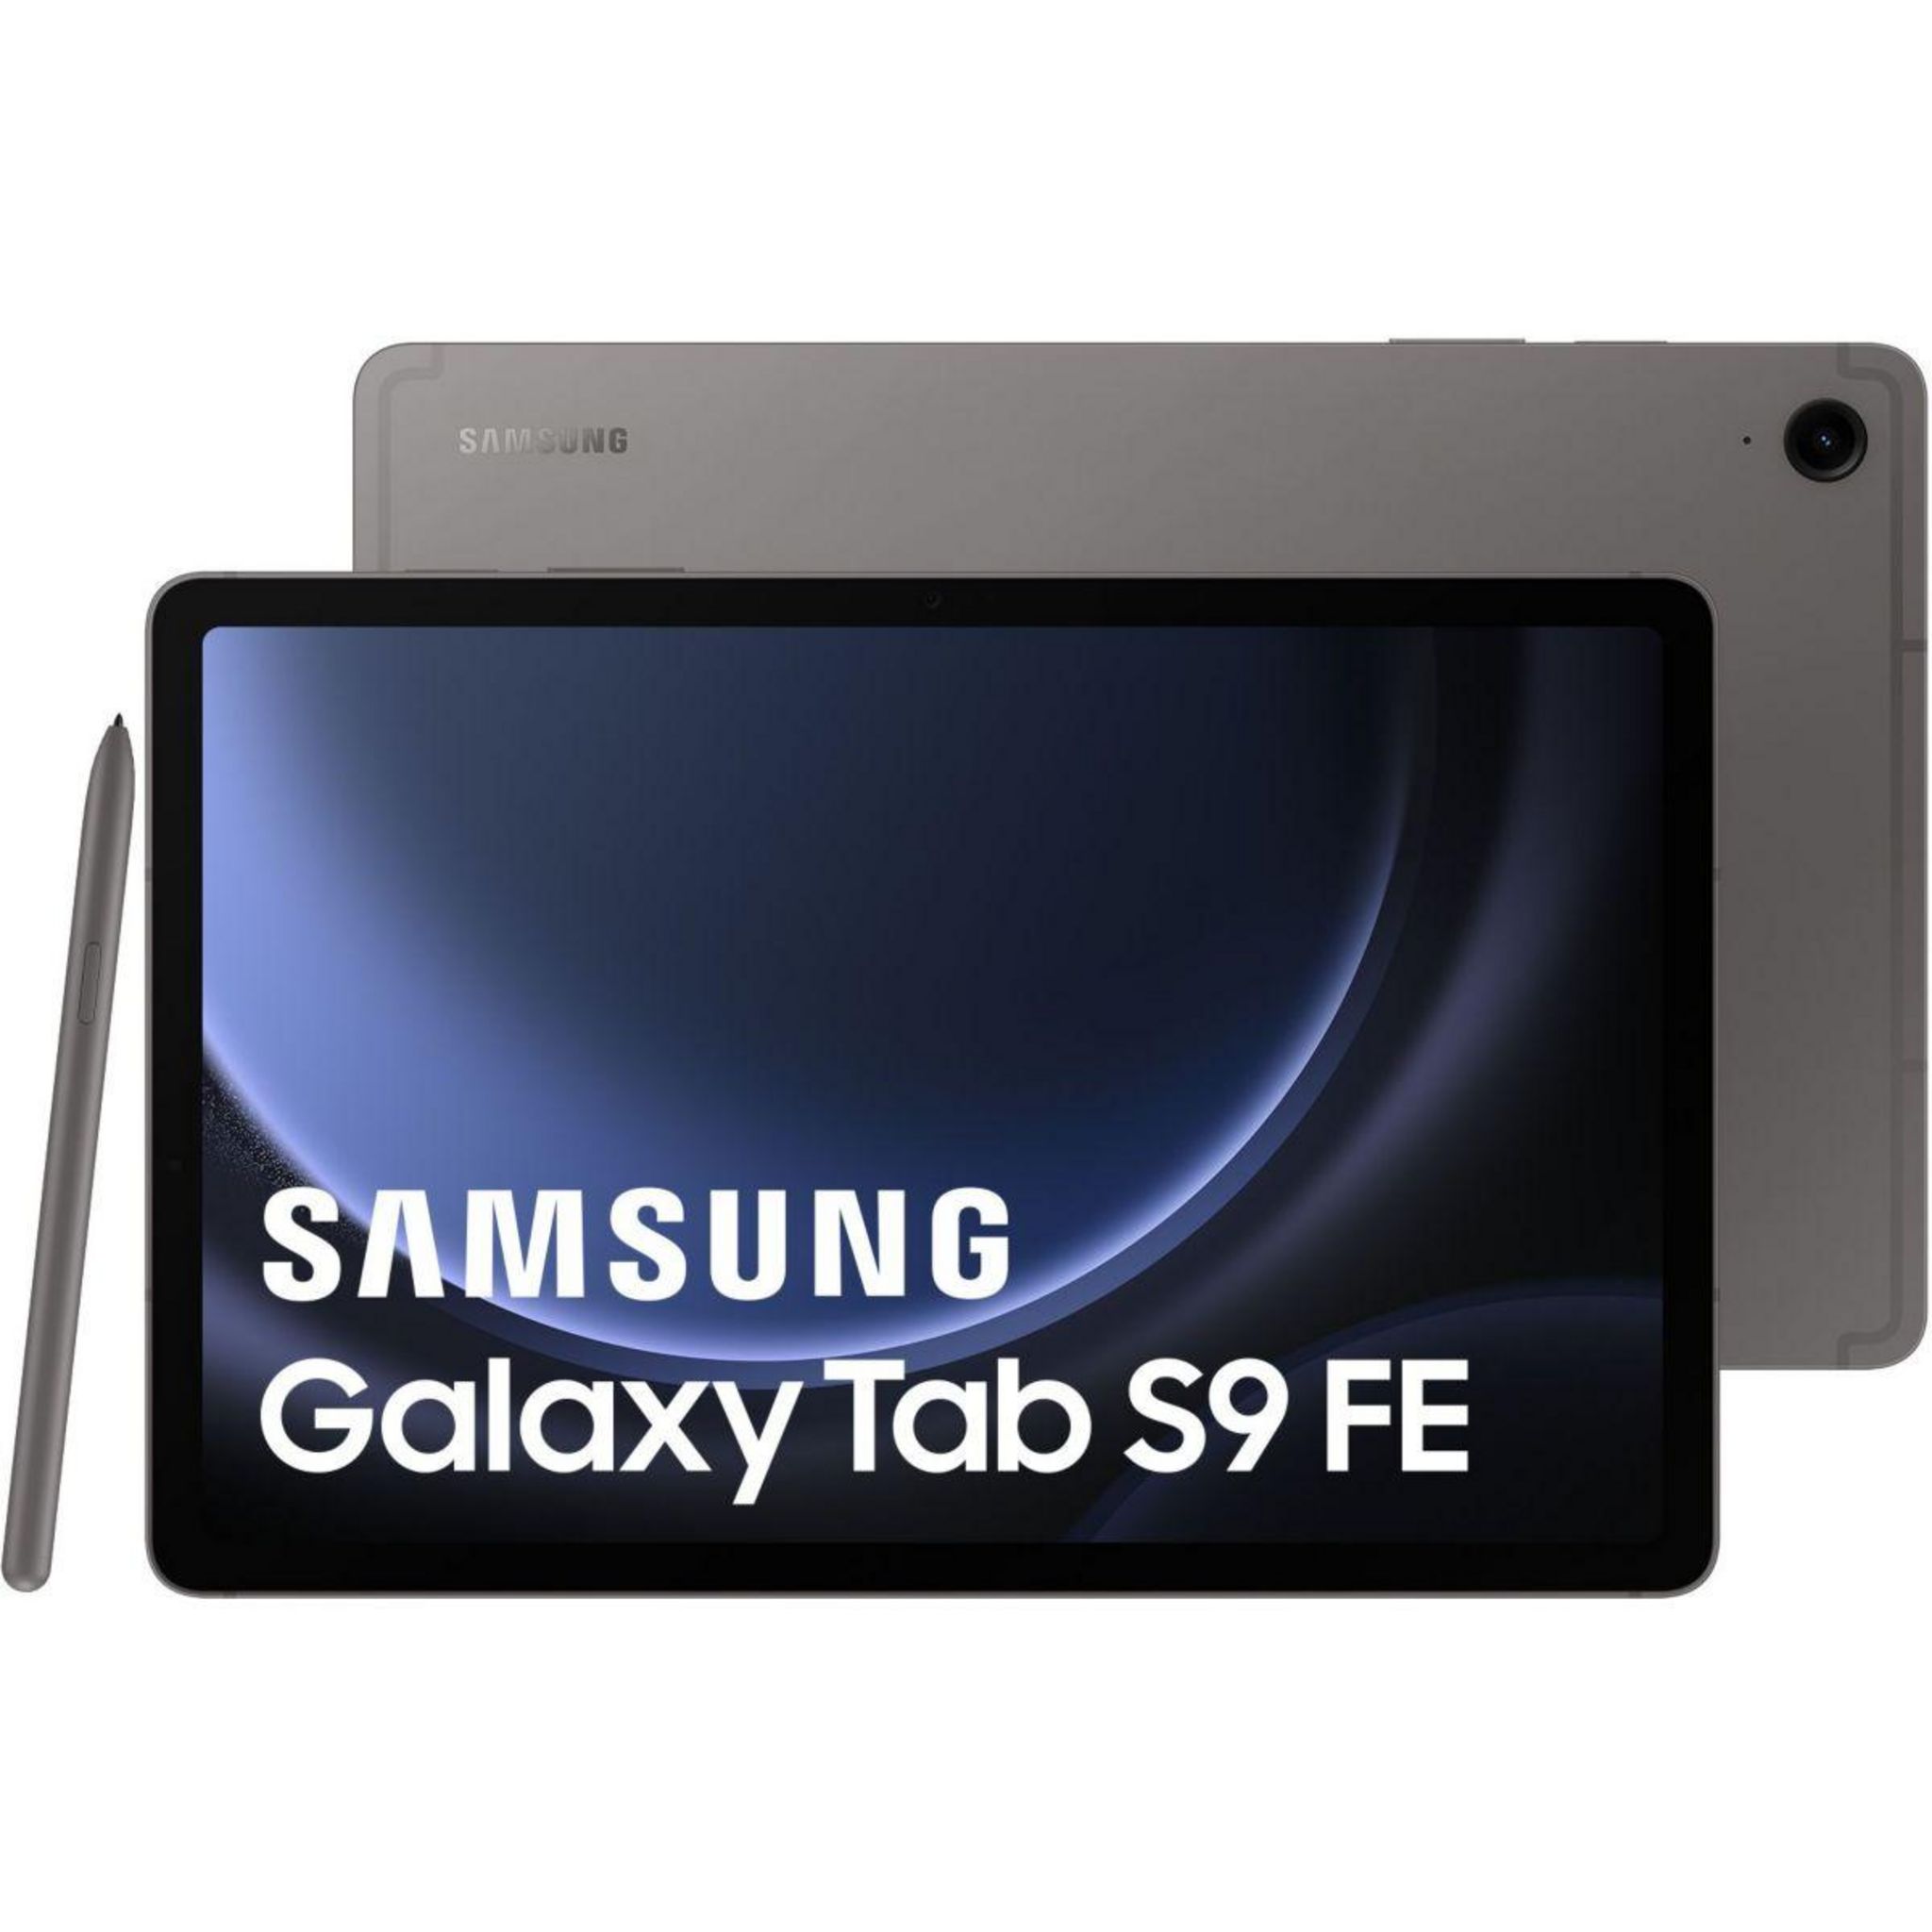 Tablette android pack s9fe+ 12.4'' + smart cover hybride gris Samsung